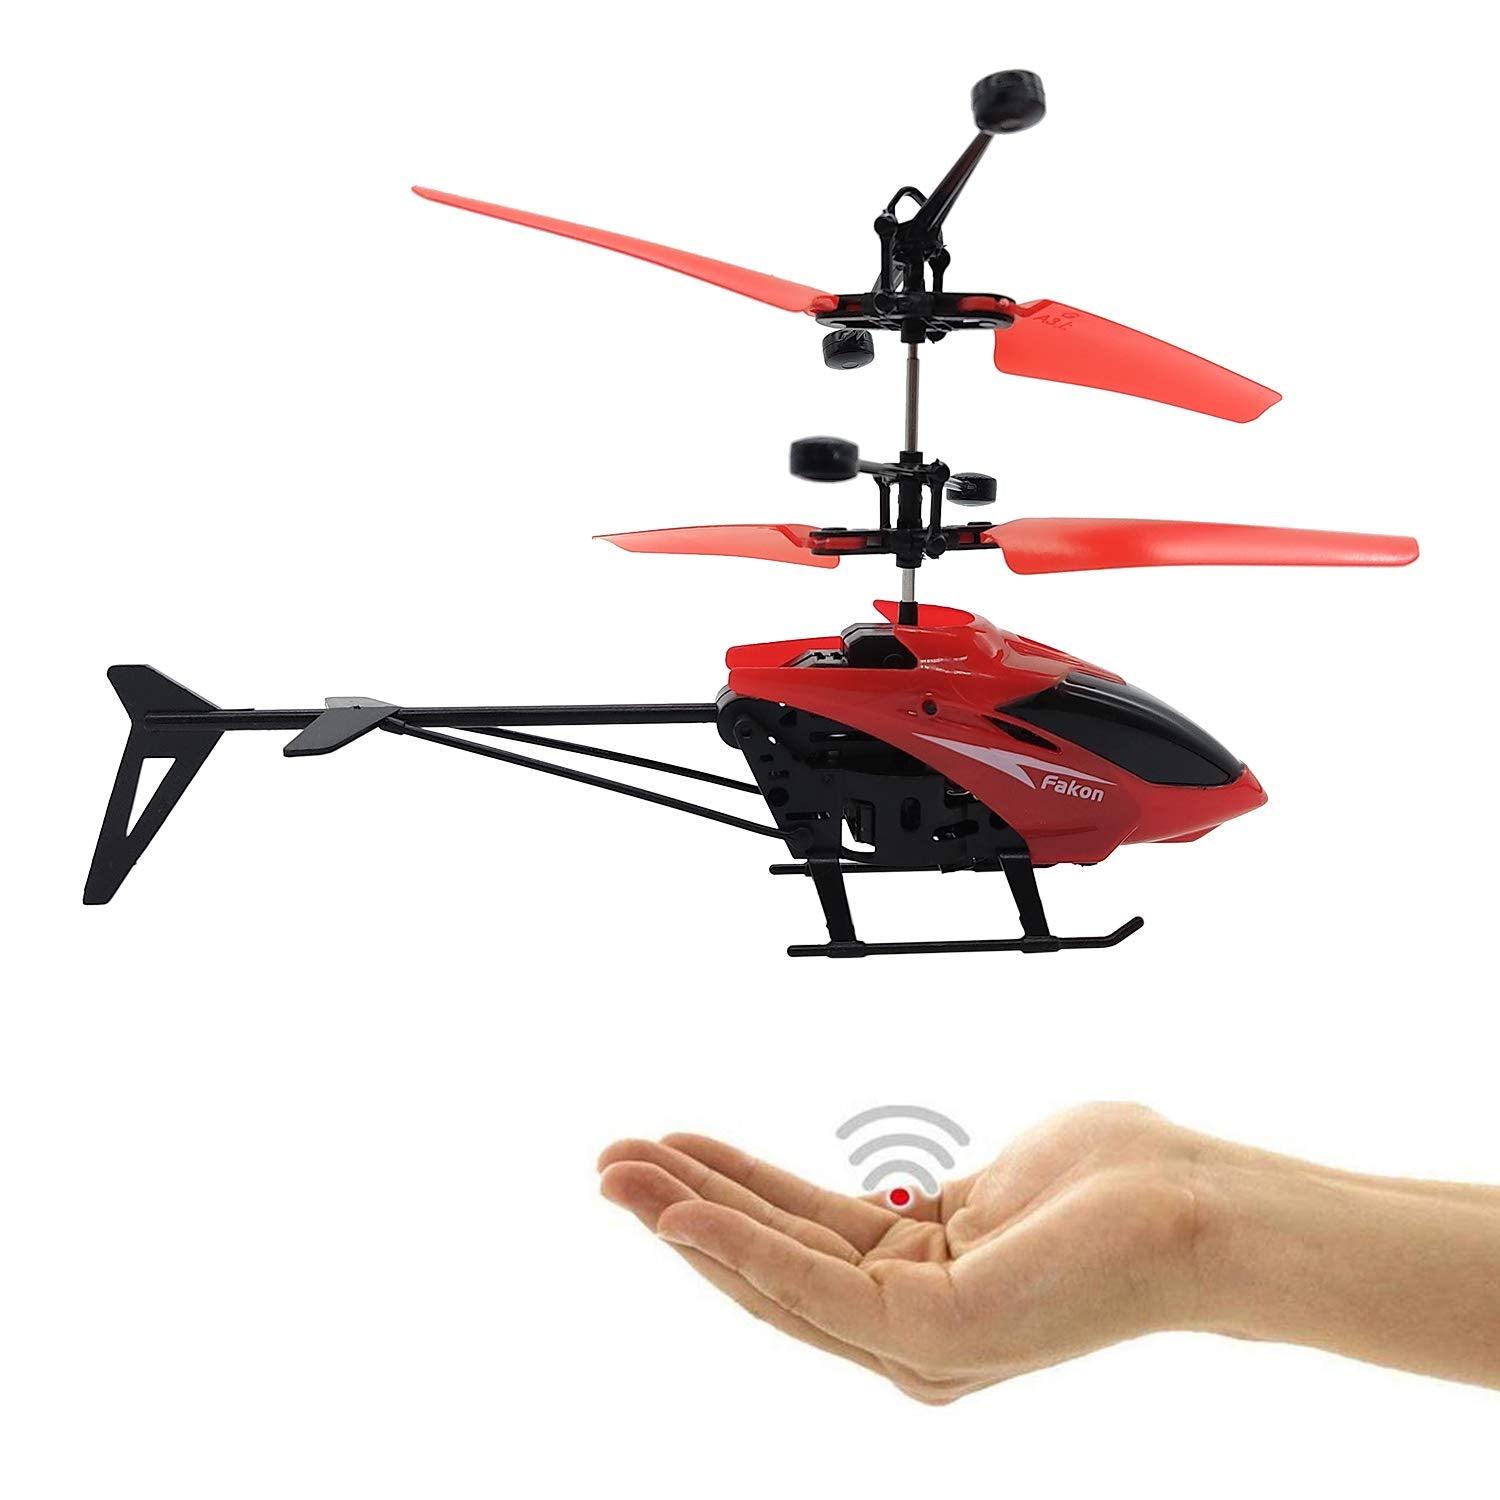 Toy Helicopter Exceed Lh-1802R